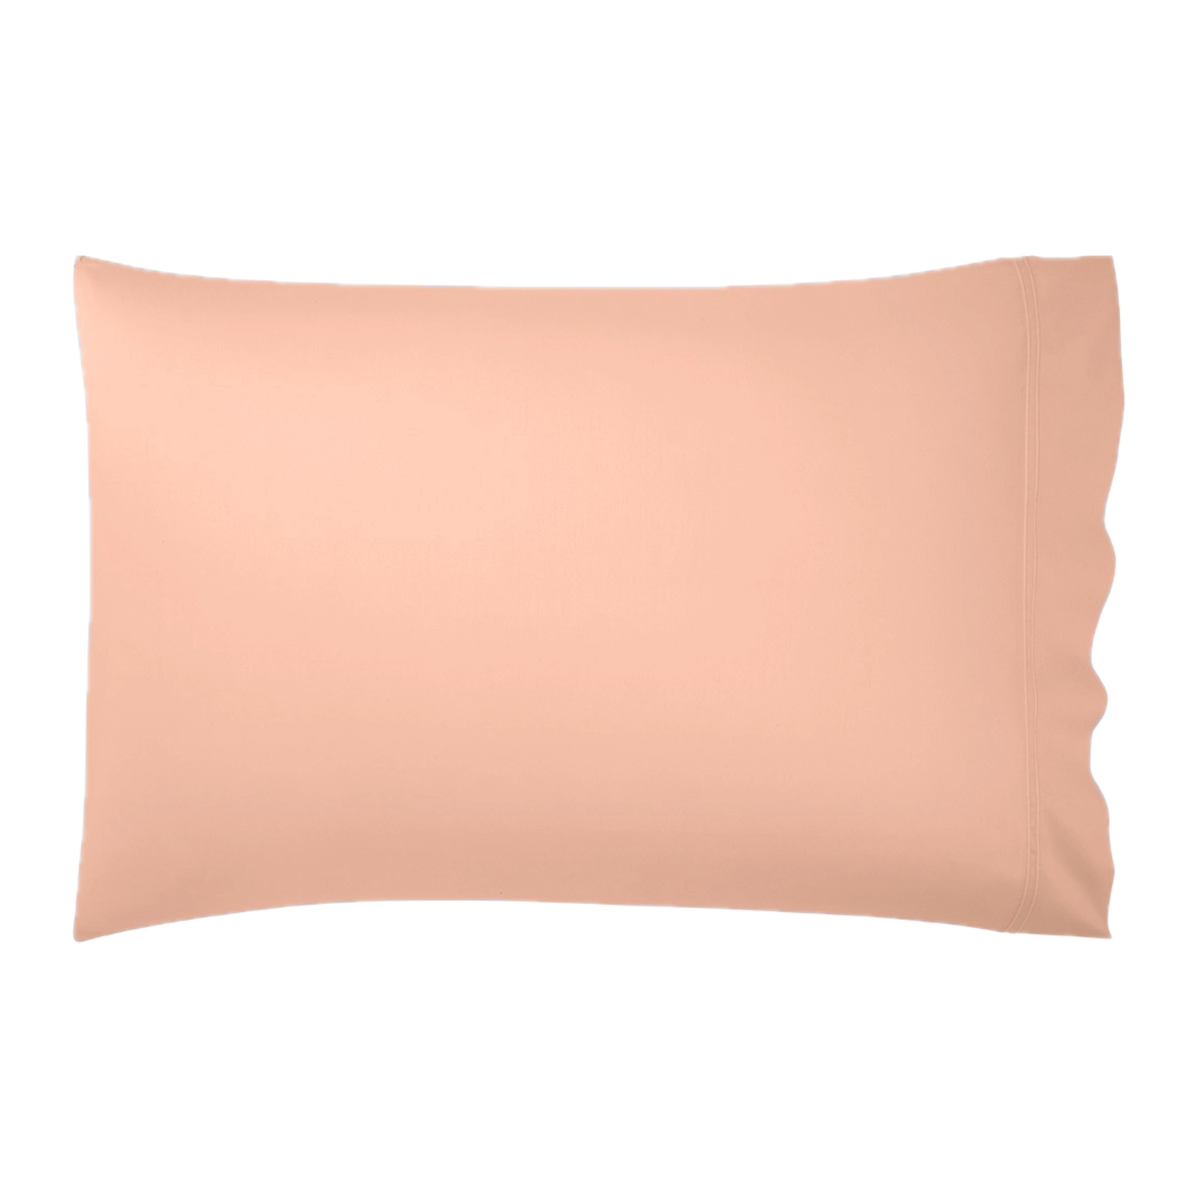 Pillow of Yves Delorme Triomphe Bedding in Sienna Color